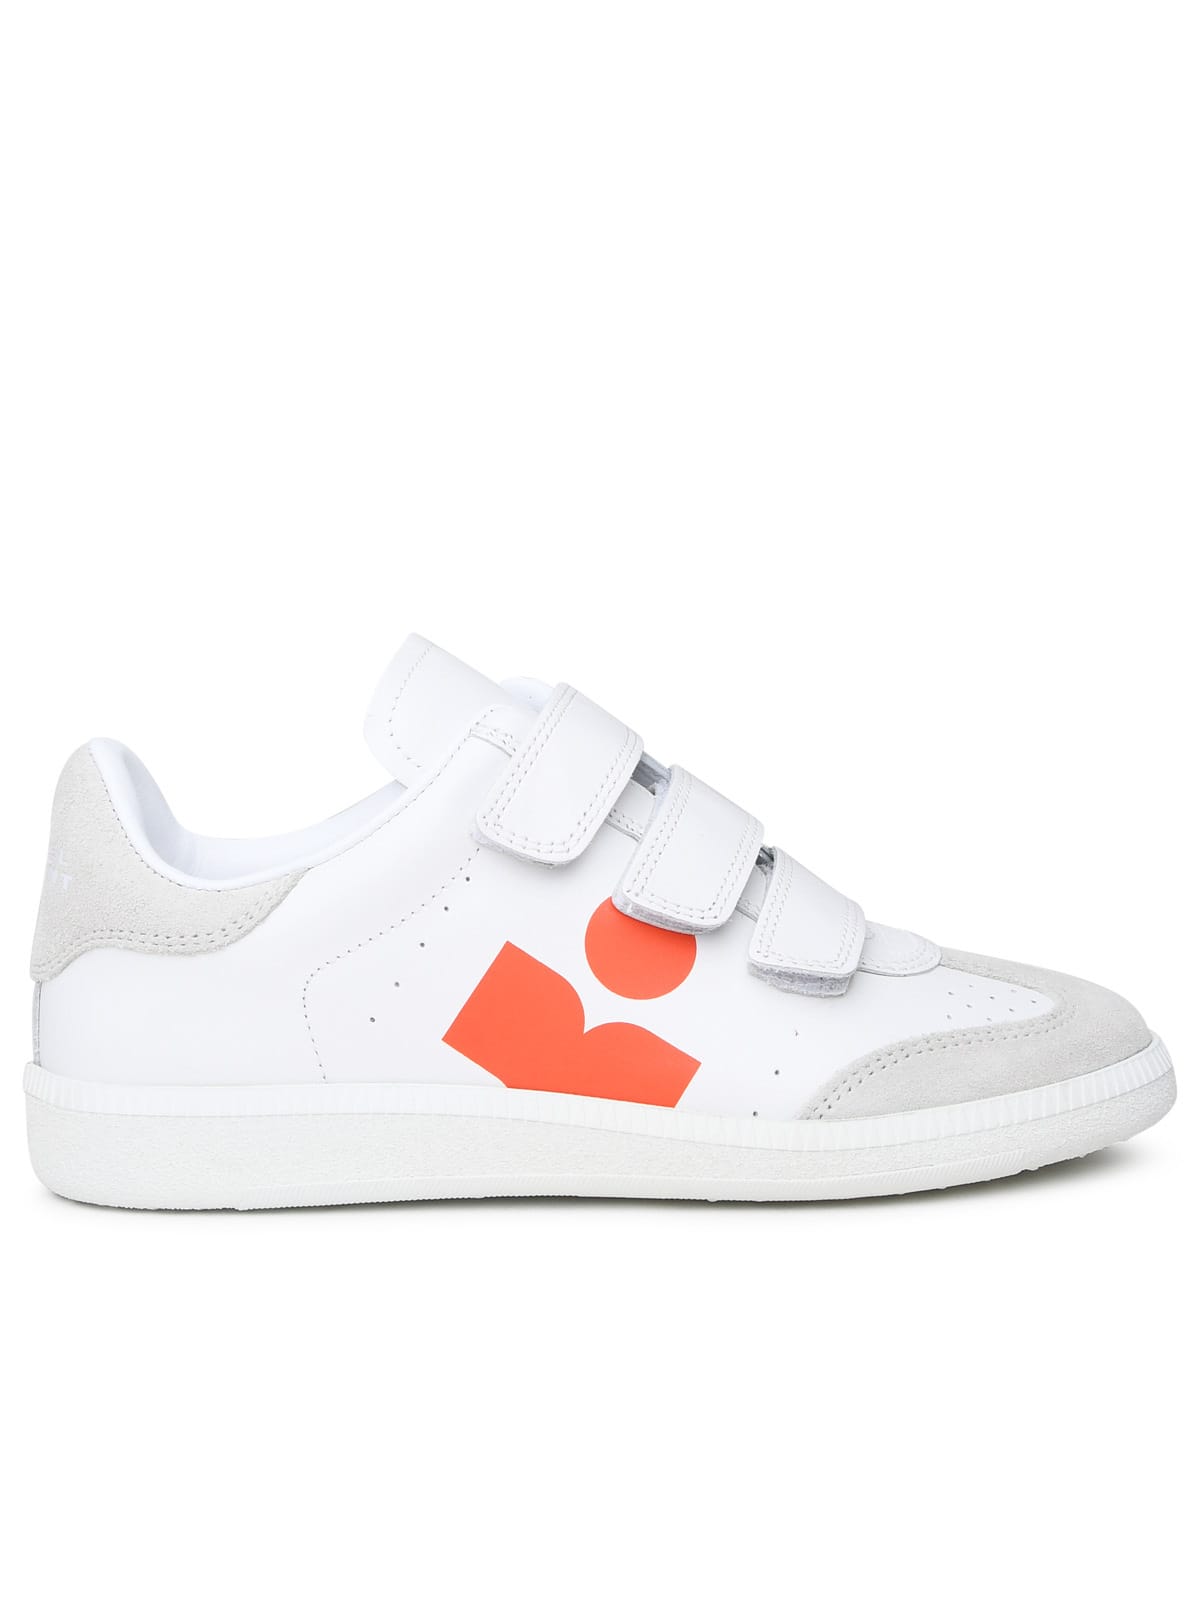 ISABEL MARANT WHITE LEATHER BETH SNEAKERS